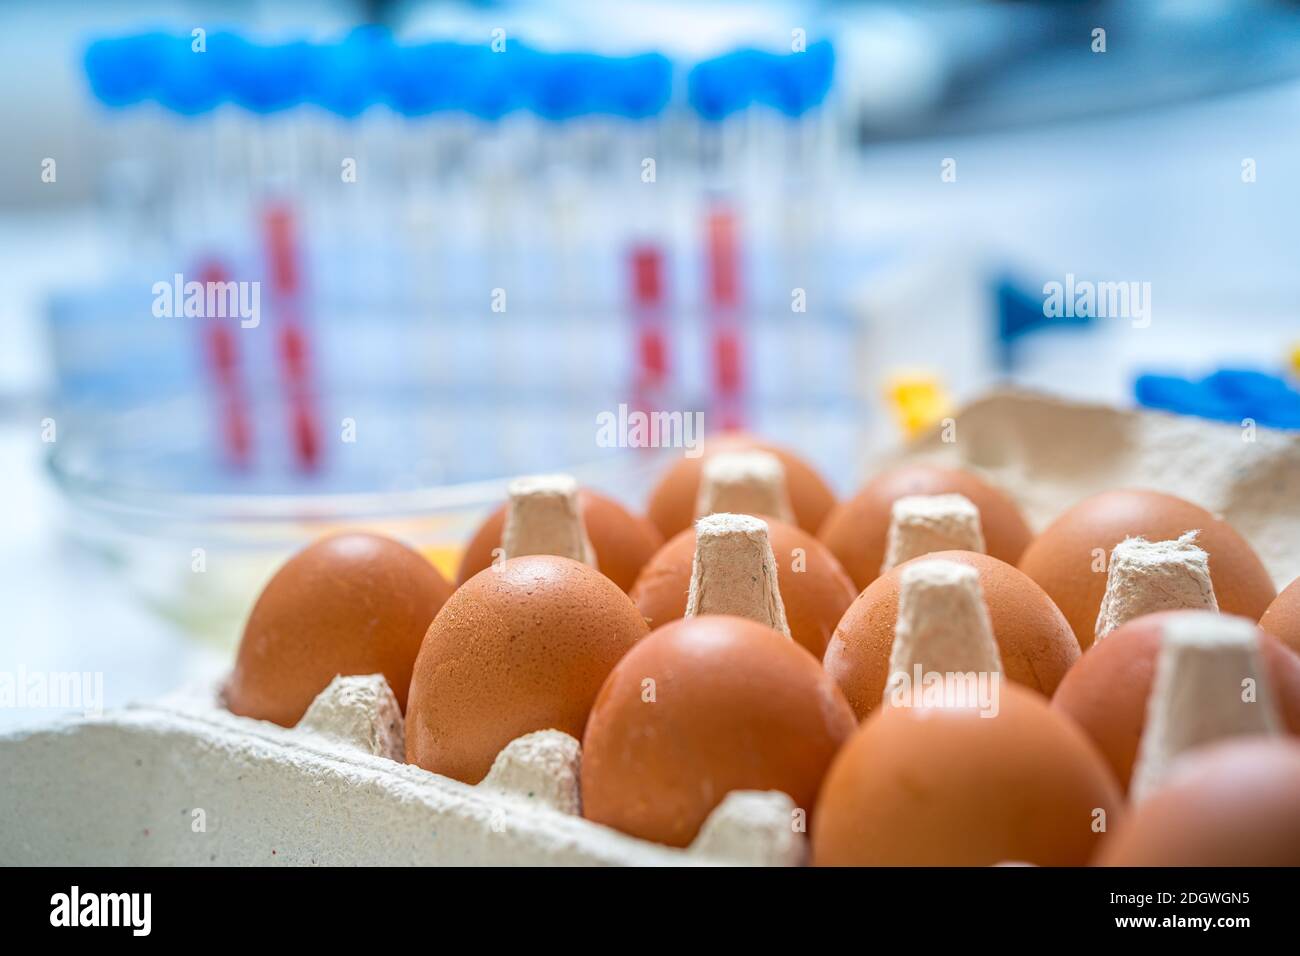 Eggs are tested in laboratory. Food quality control concept. Stock Photo